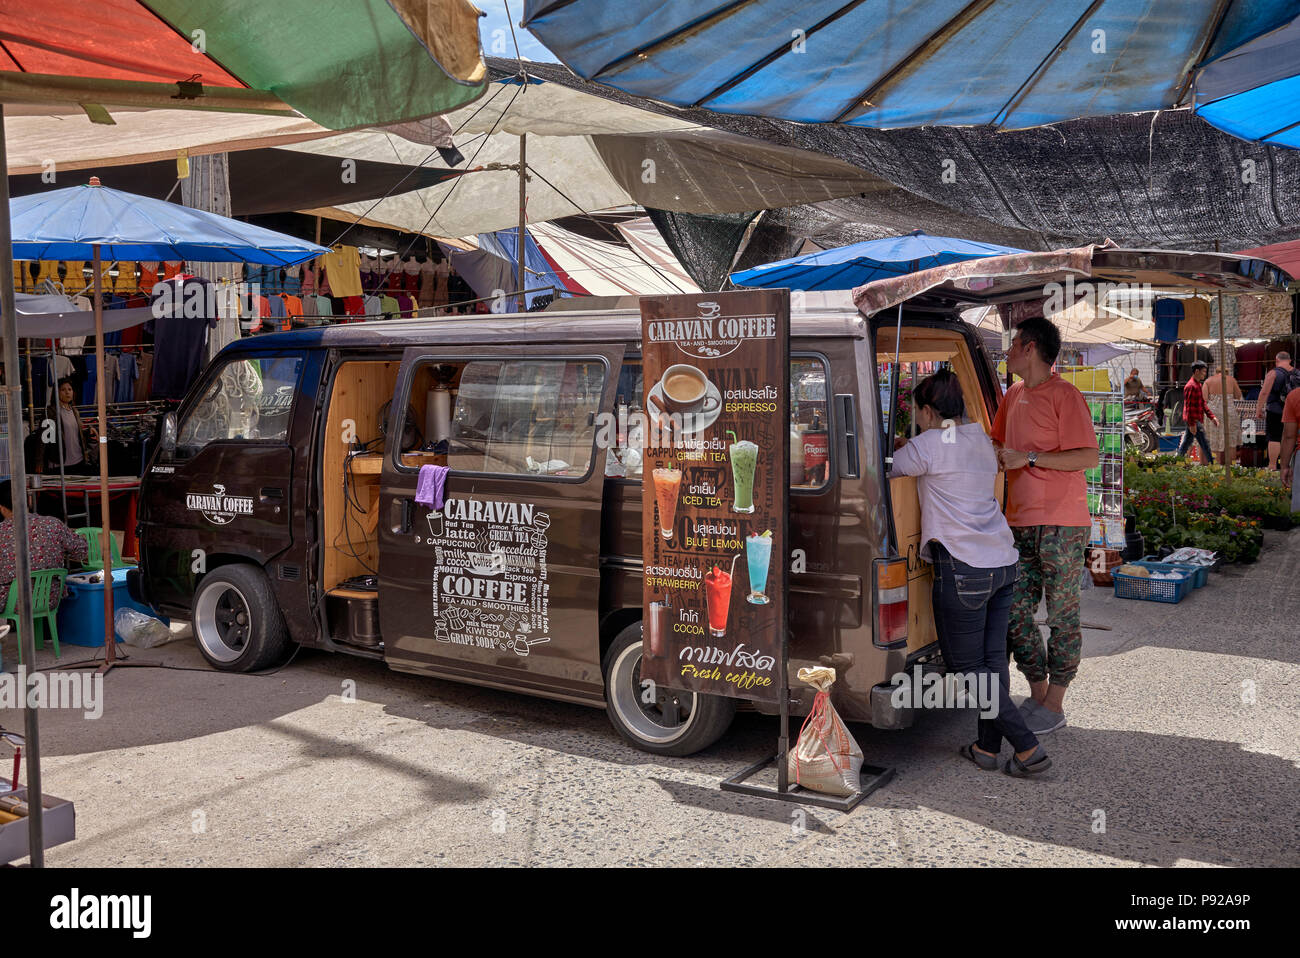 Volkswagen dormobile converted and utilised  as a  mobile coffee shop. Thailand street market, Southeast Asia Stock Photo